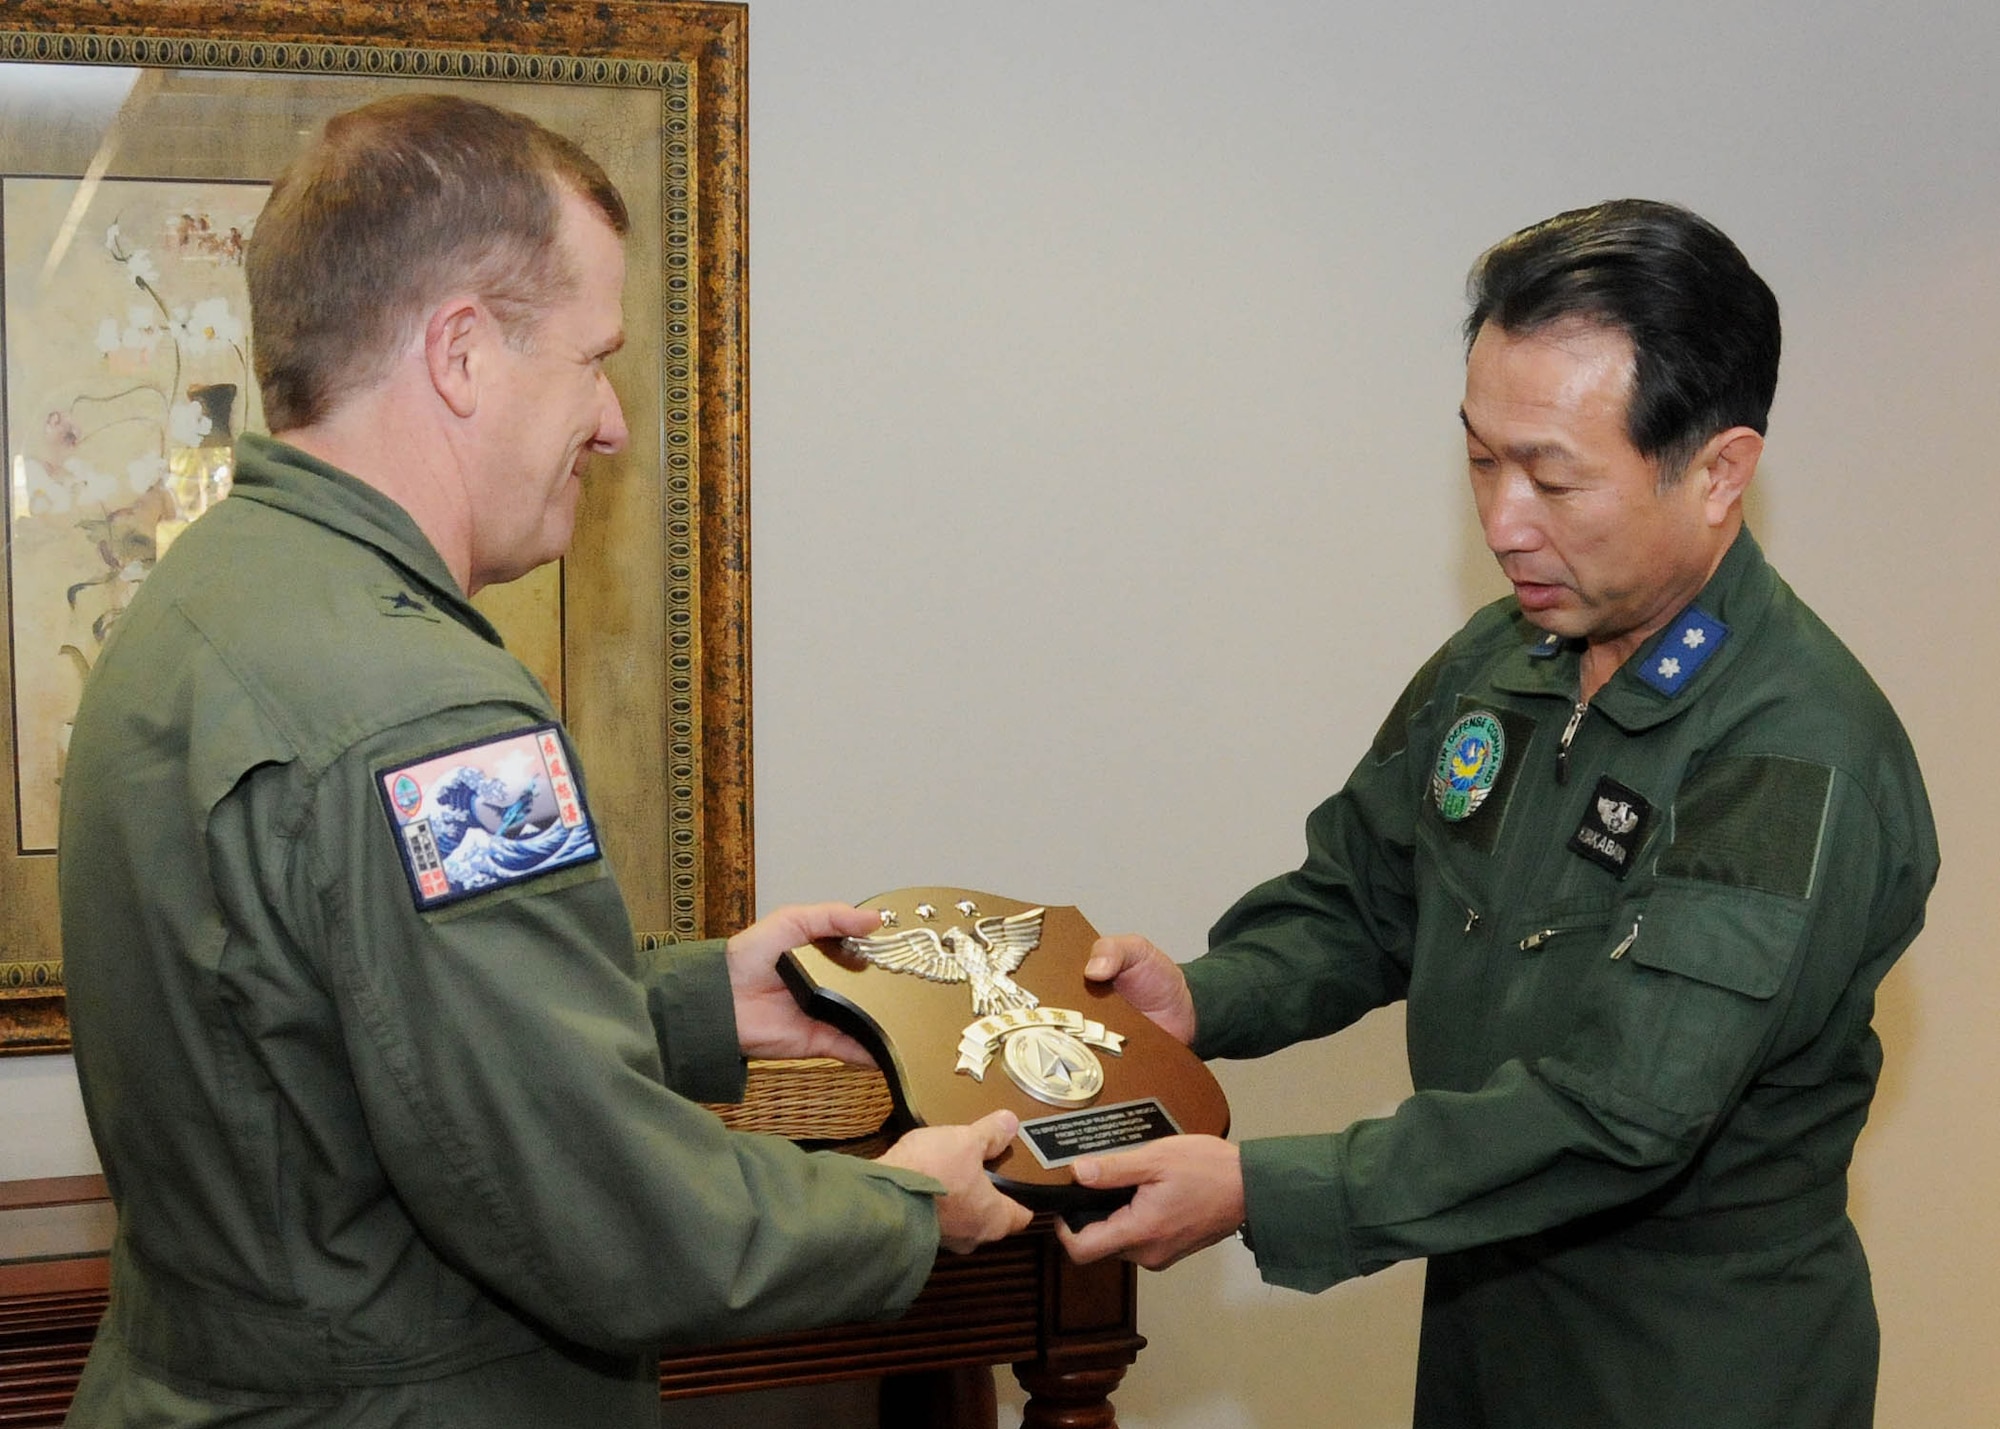 ANDERSEN AIR FORCE BASE, Guam - Maj. Gen. Hideo Wakabayashi, Japan Air Self Defense Force Command Defense Plans and Operations Chief, presents a gift on behalf of the JASDF to Brig. Gen. Phil Ruhlman, 36th Wing commander, here Feb. 12 in appreciation of the support and hospitality Team Andersen offered during the Cope North exercise. (U.S. Air Force photo by Senior Airman Nichelle Griffiths)